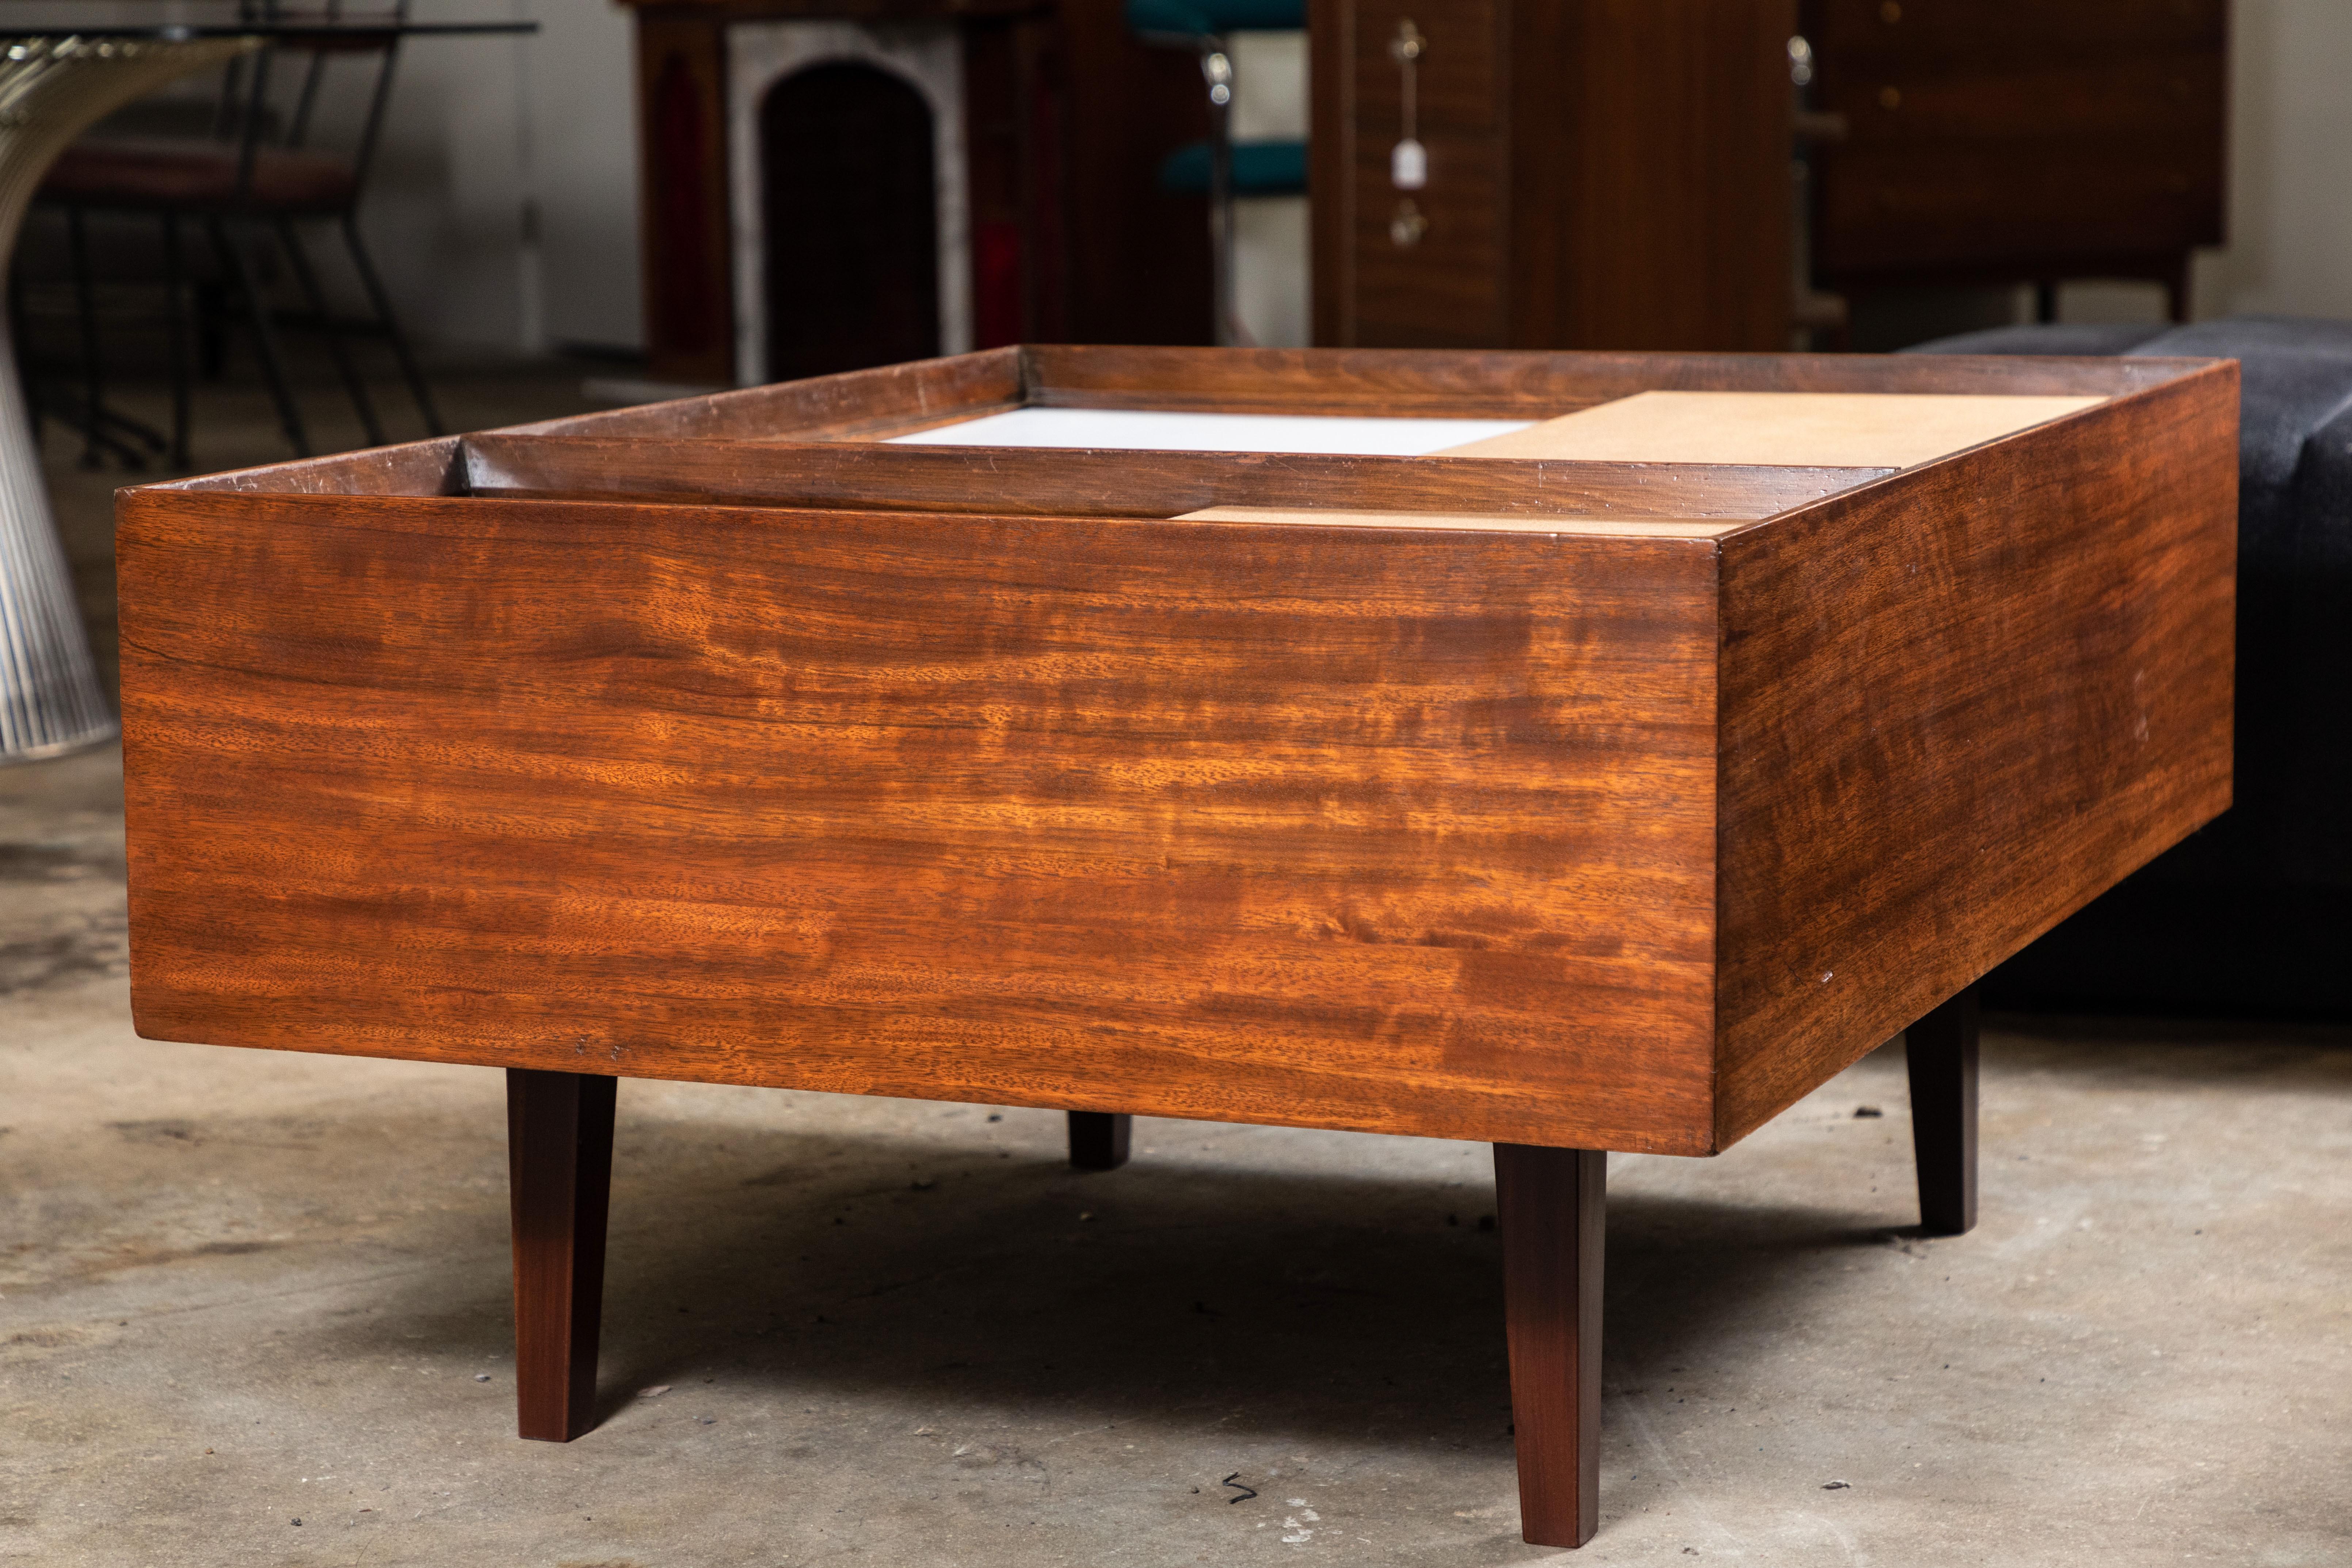 Milo Baughman Coffee Table in Exotic Mindoro Wood for Drexel For Sale 4